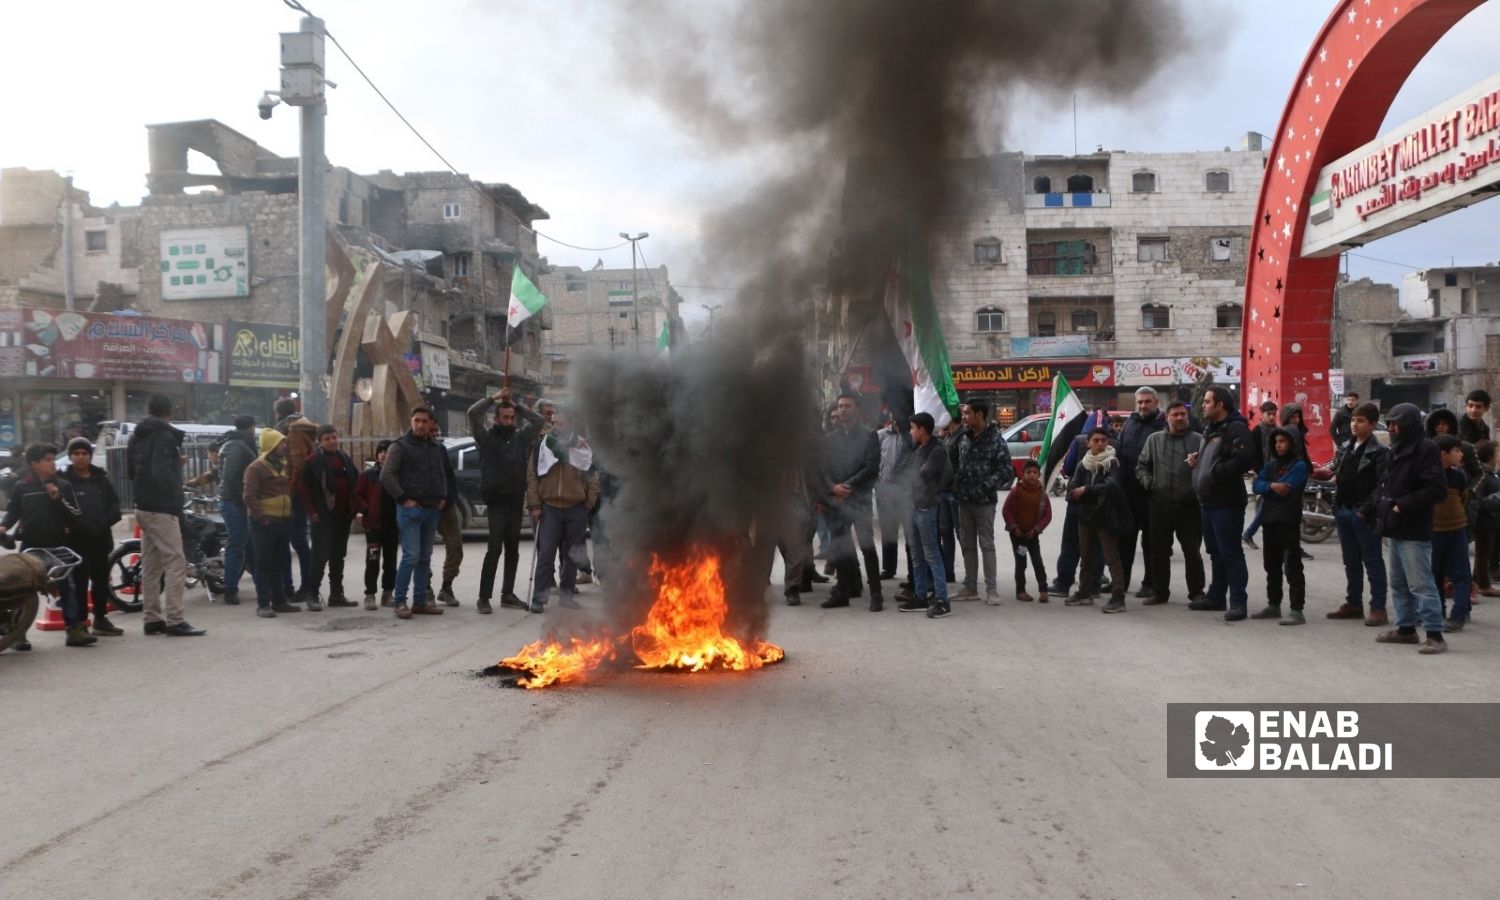 A demonstration in front of the Center roundabout in the city of al-Bab in the eastern countryside of Aleppo, 5 January 2022 (Enab Baladi / Siraj Muhammad)